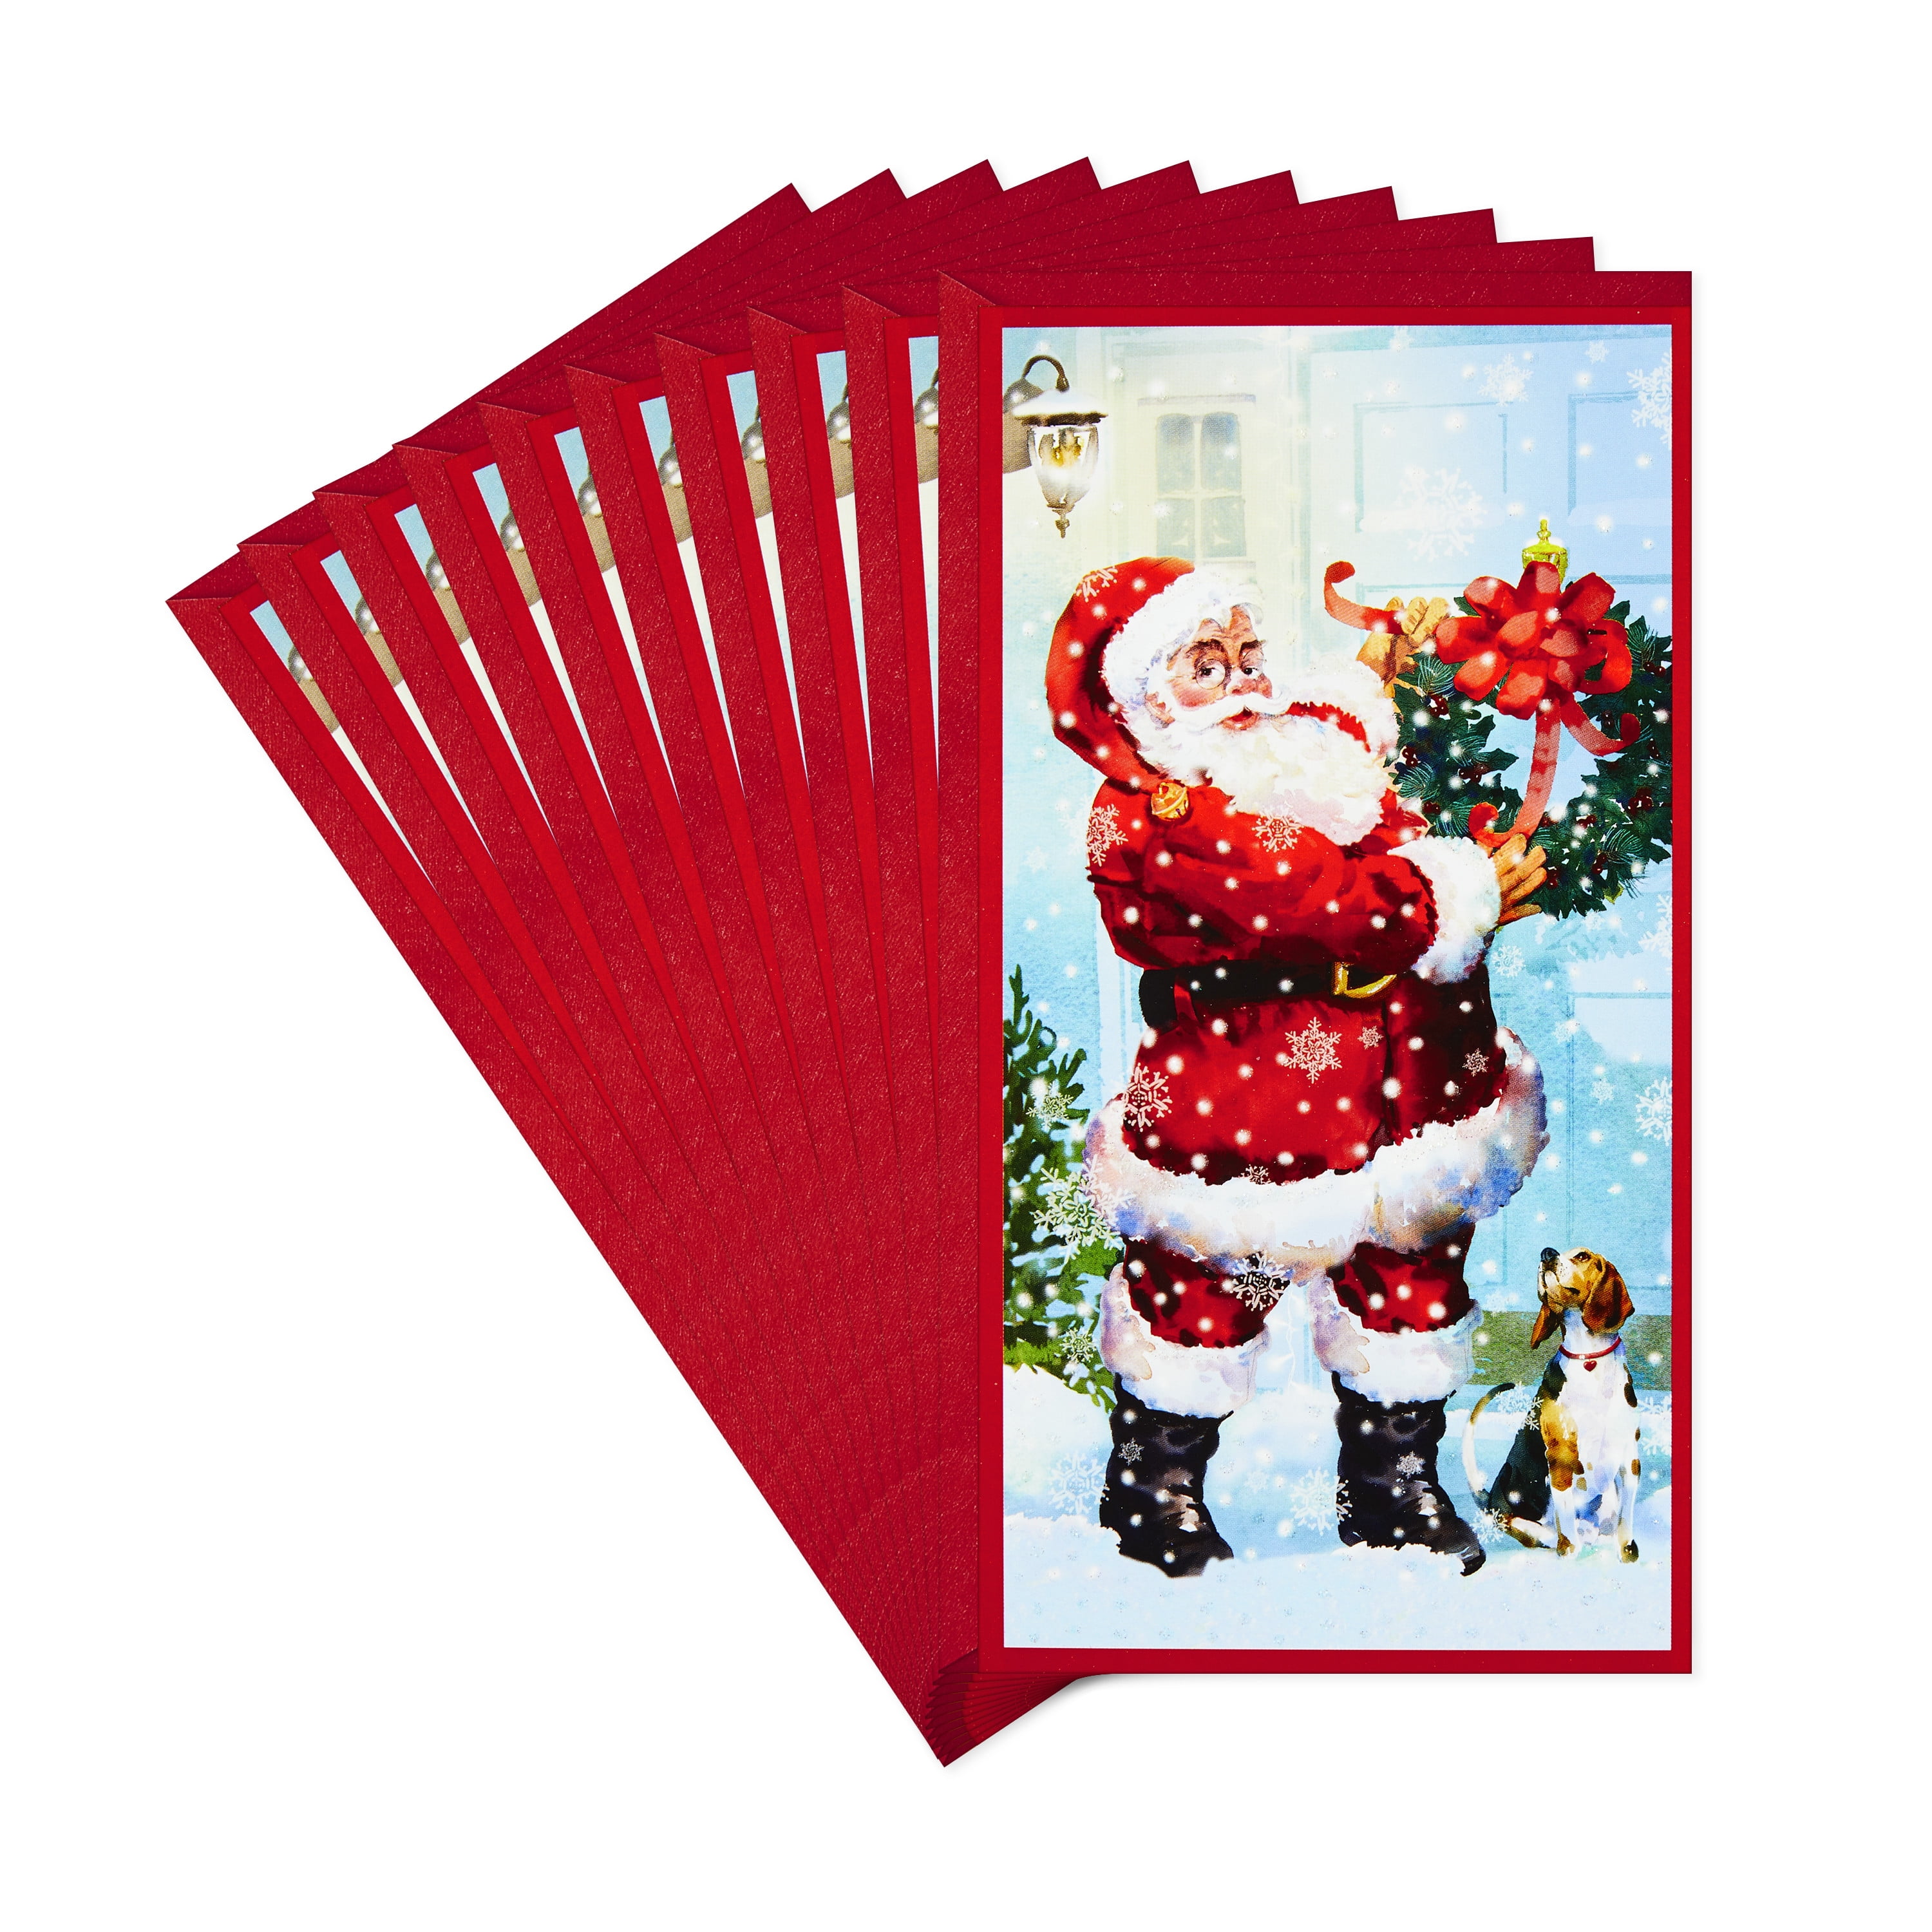 WOW Pack of 8 Christmas Money Wallet Gift Cards & Envelopes Novelty Designs 